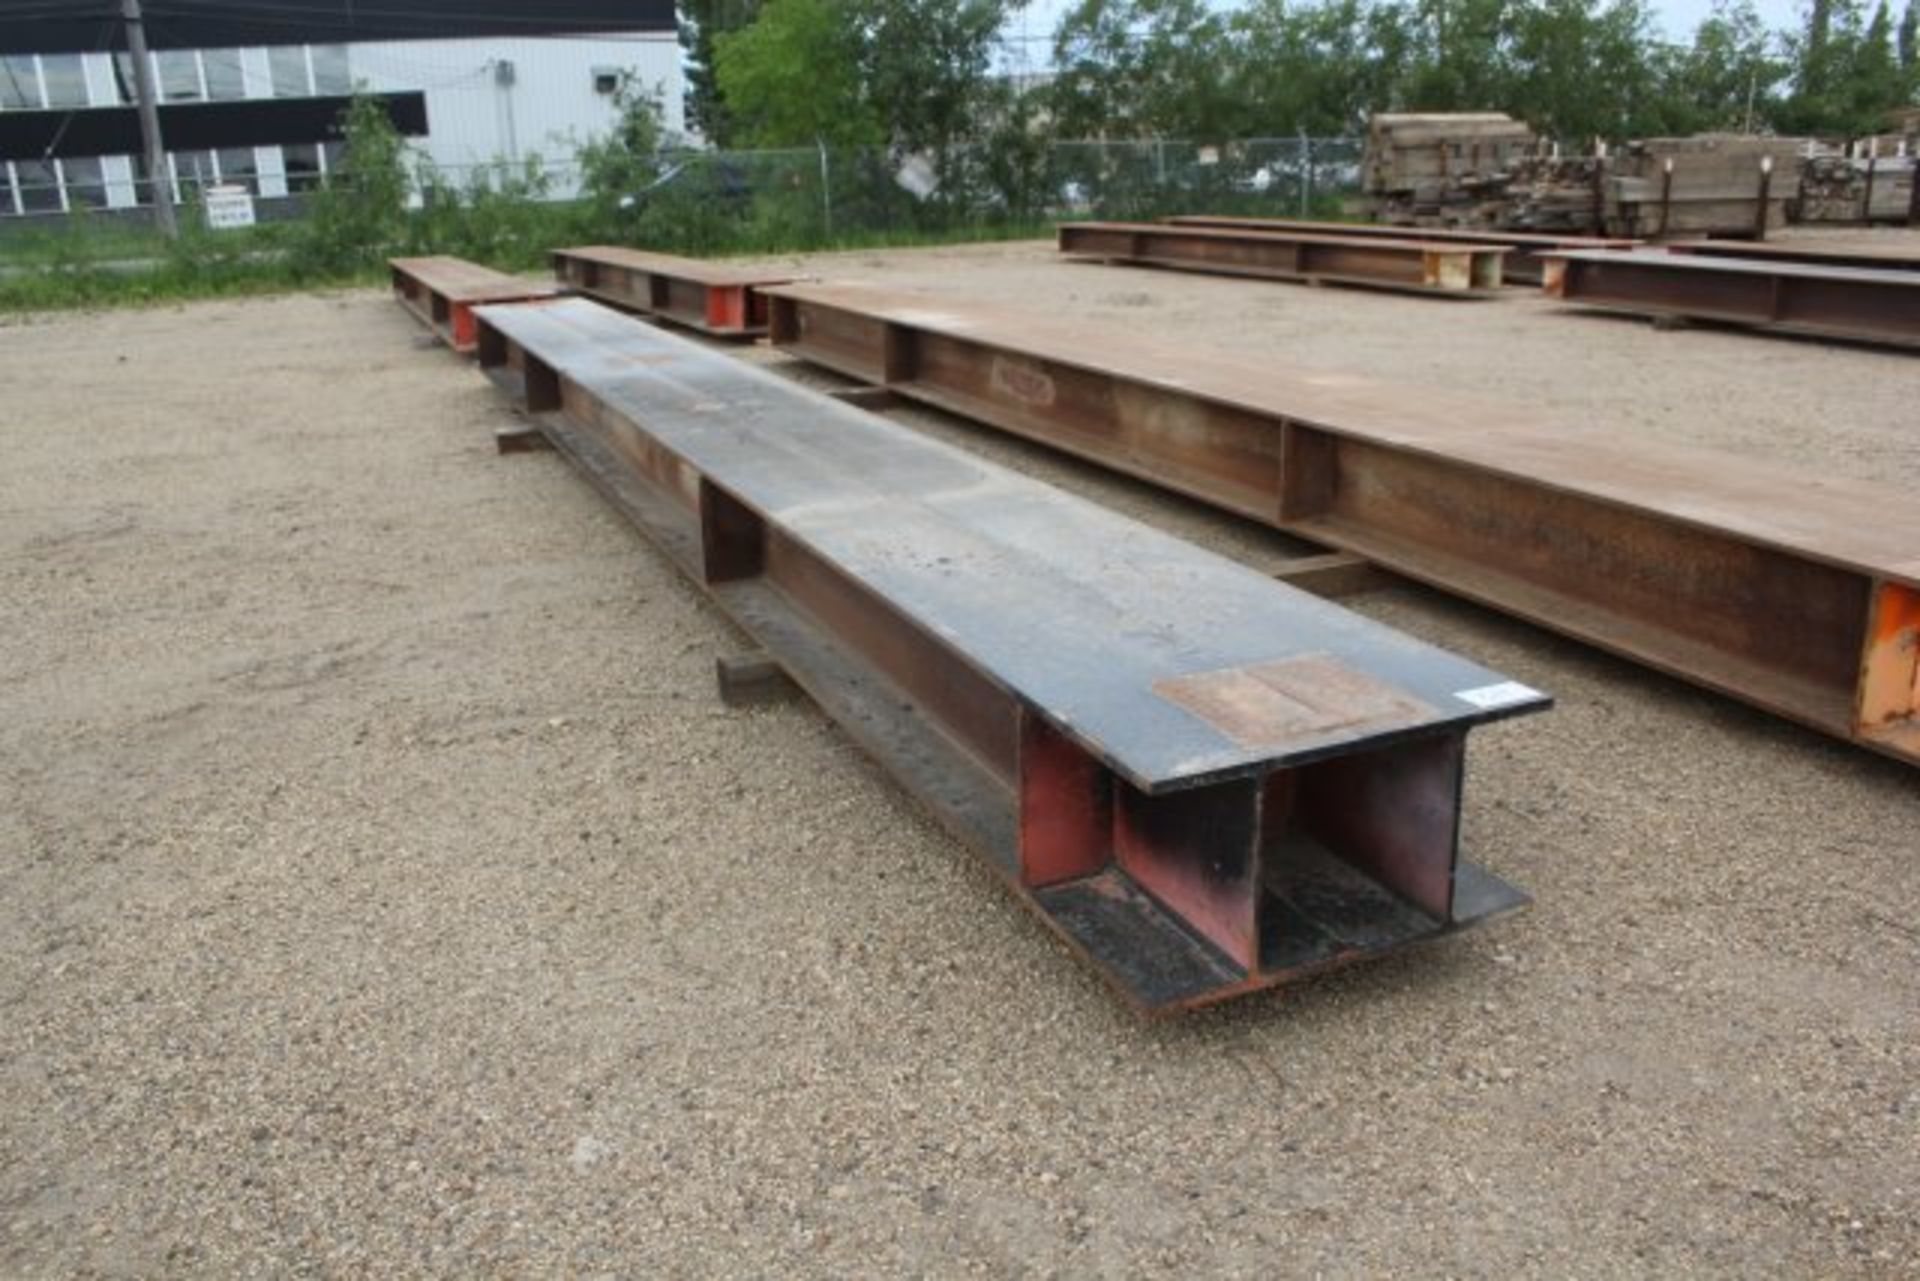 MAMMOET SUPPORT BEAM DOUBLE 12 WIDE FLANGE X 72LB X 24' #5346924 "